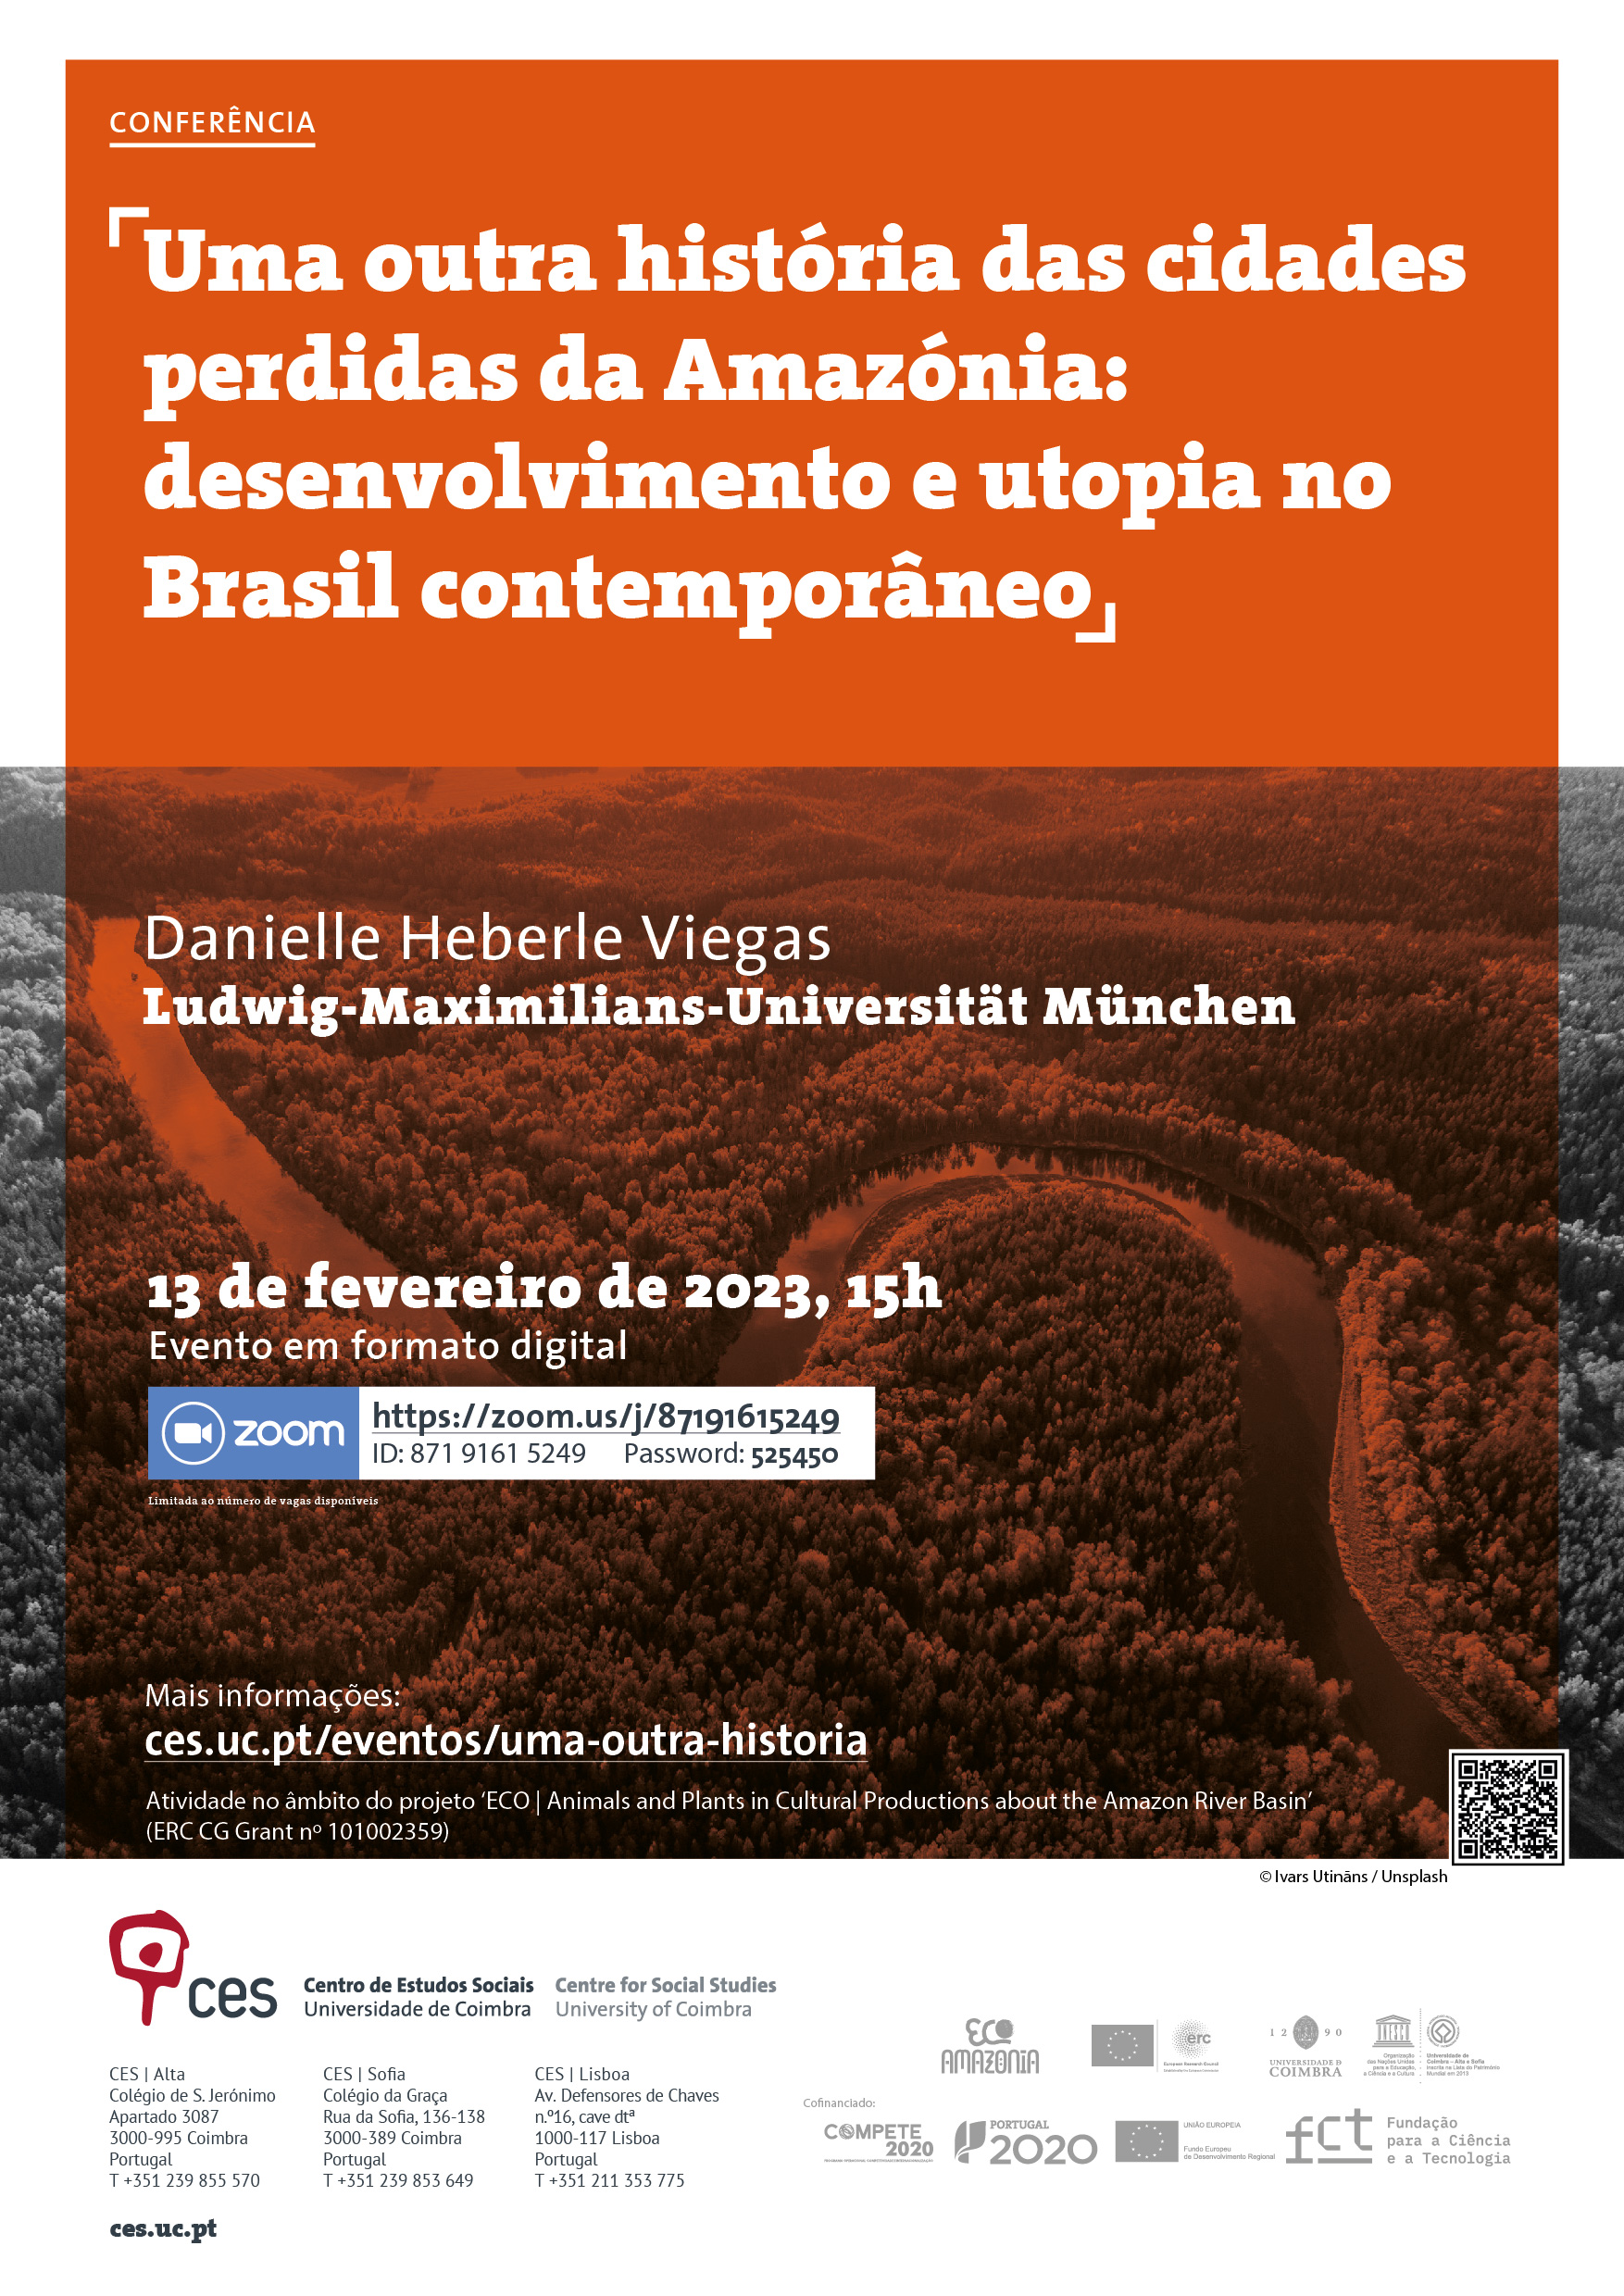 Another history of the lost cities of Amazonia: development and utopia in contemporary Brazil<span id="edit_41657"><script>$(function() { $('#edit_41657').load( "/myces/user/editobj.php?tipo=evento&id=41657" ); });</script></span>